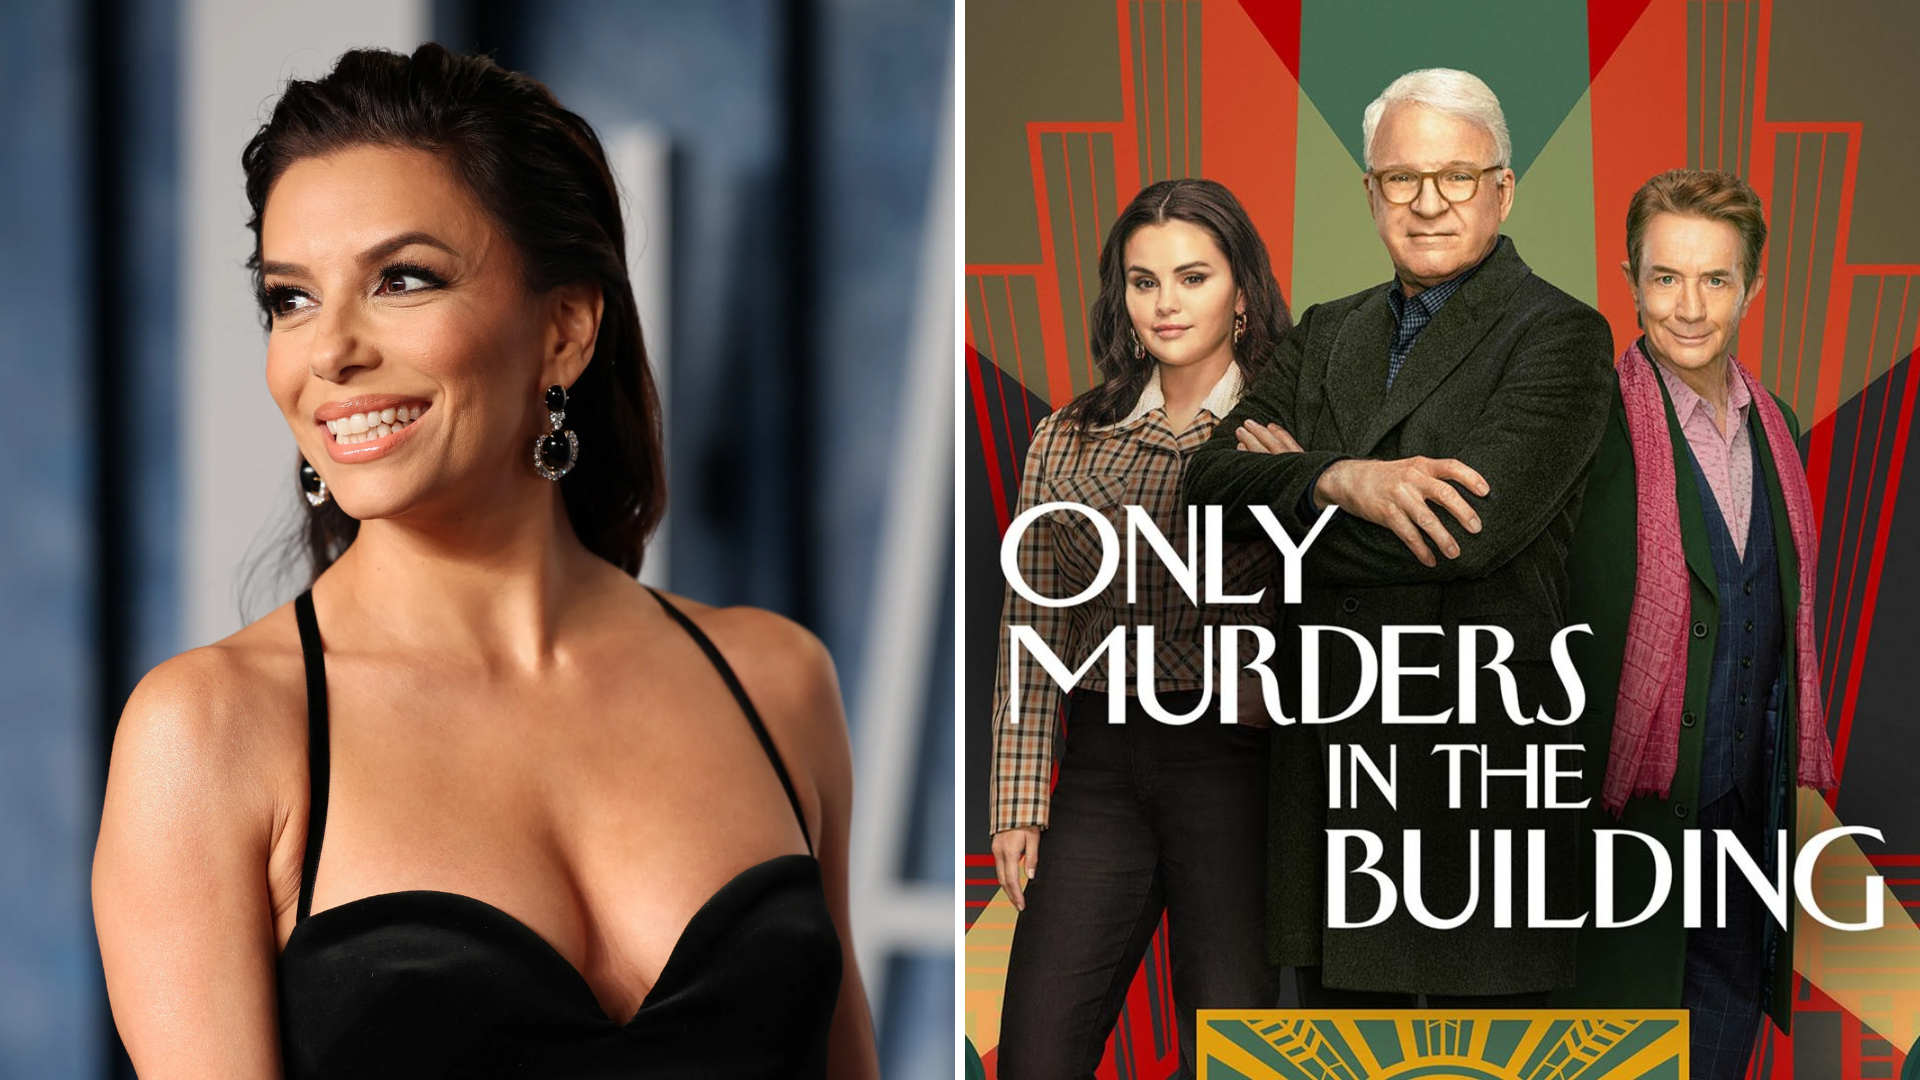 Eva Longoria joins cast of 'Only Murders in the Building 4'